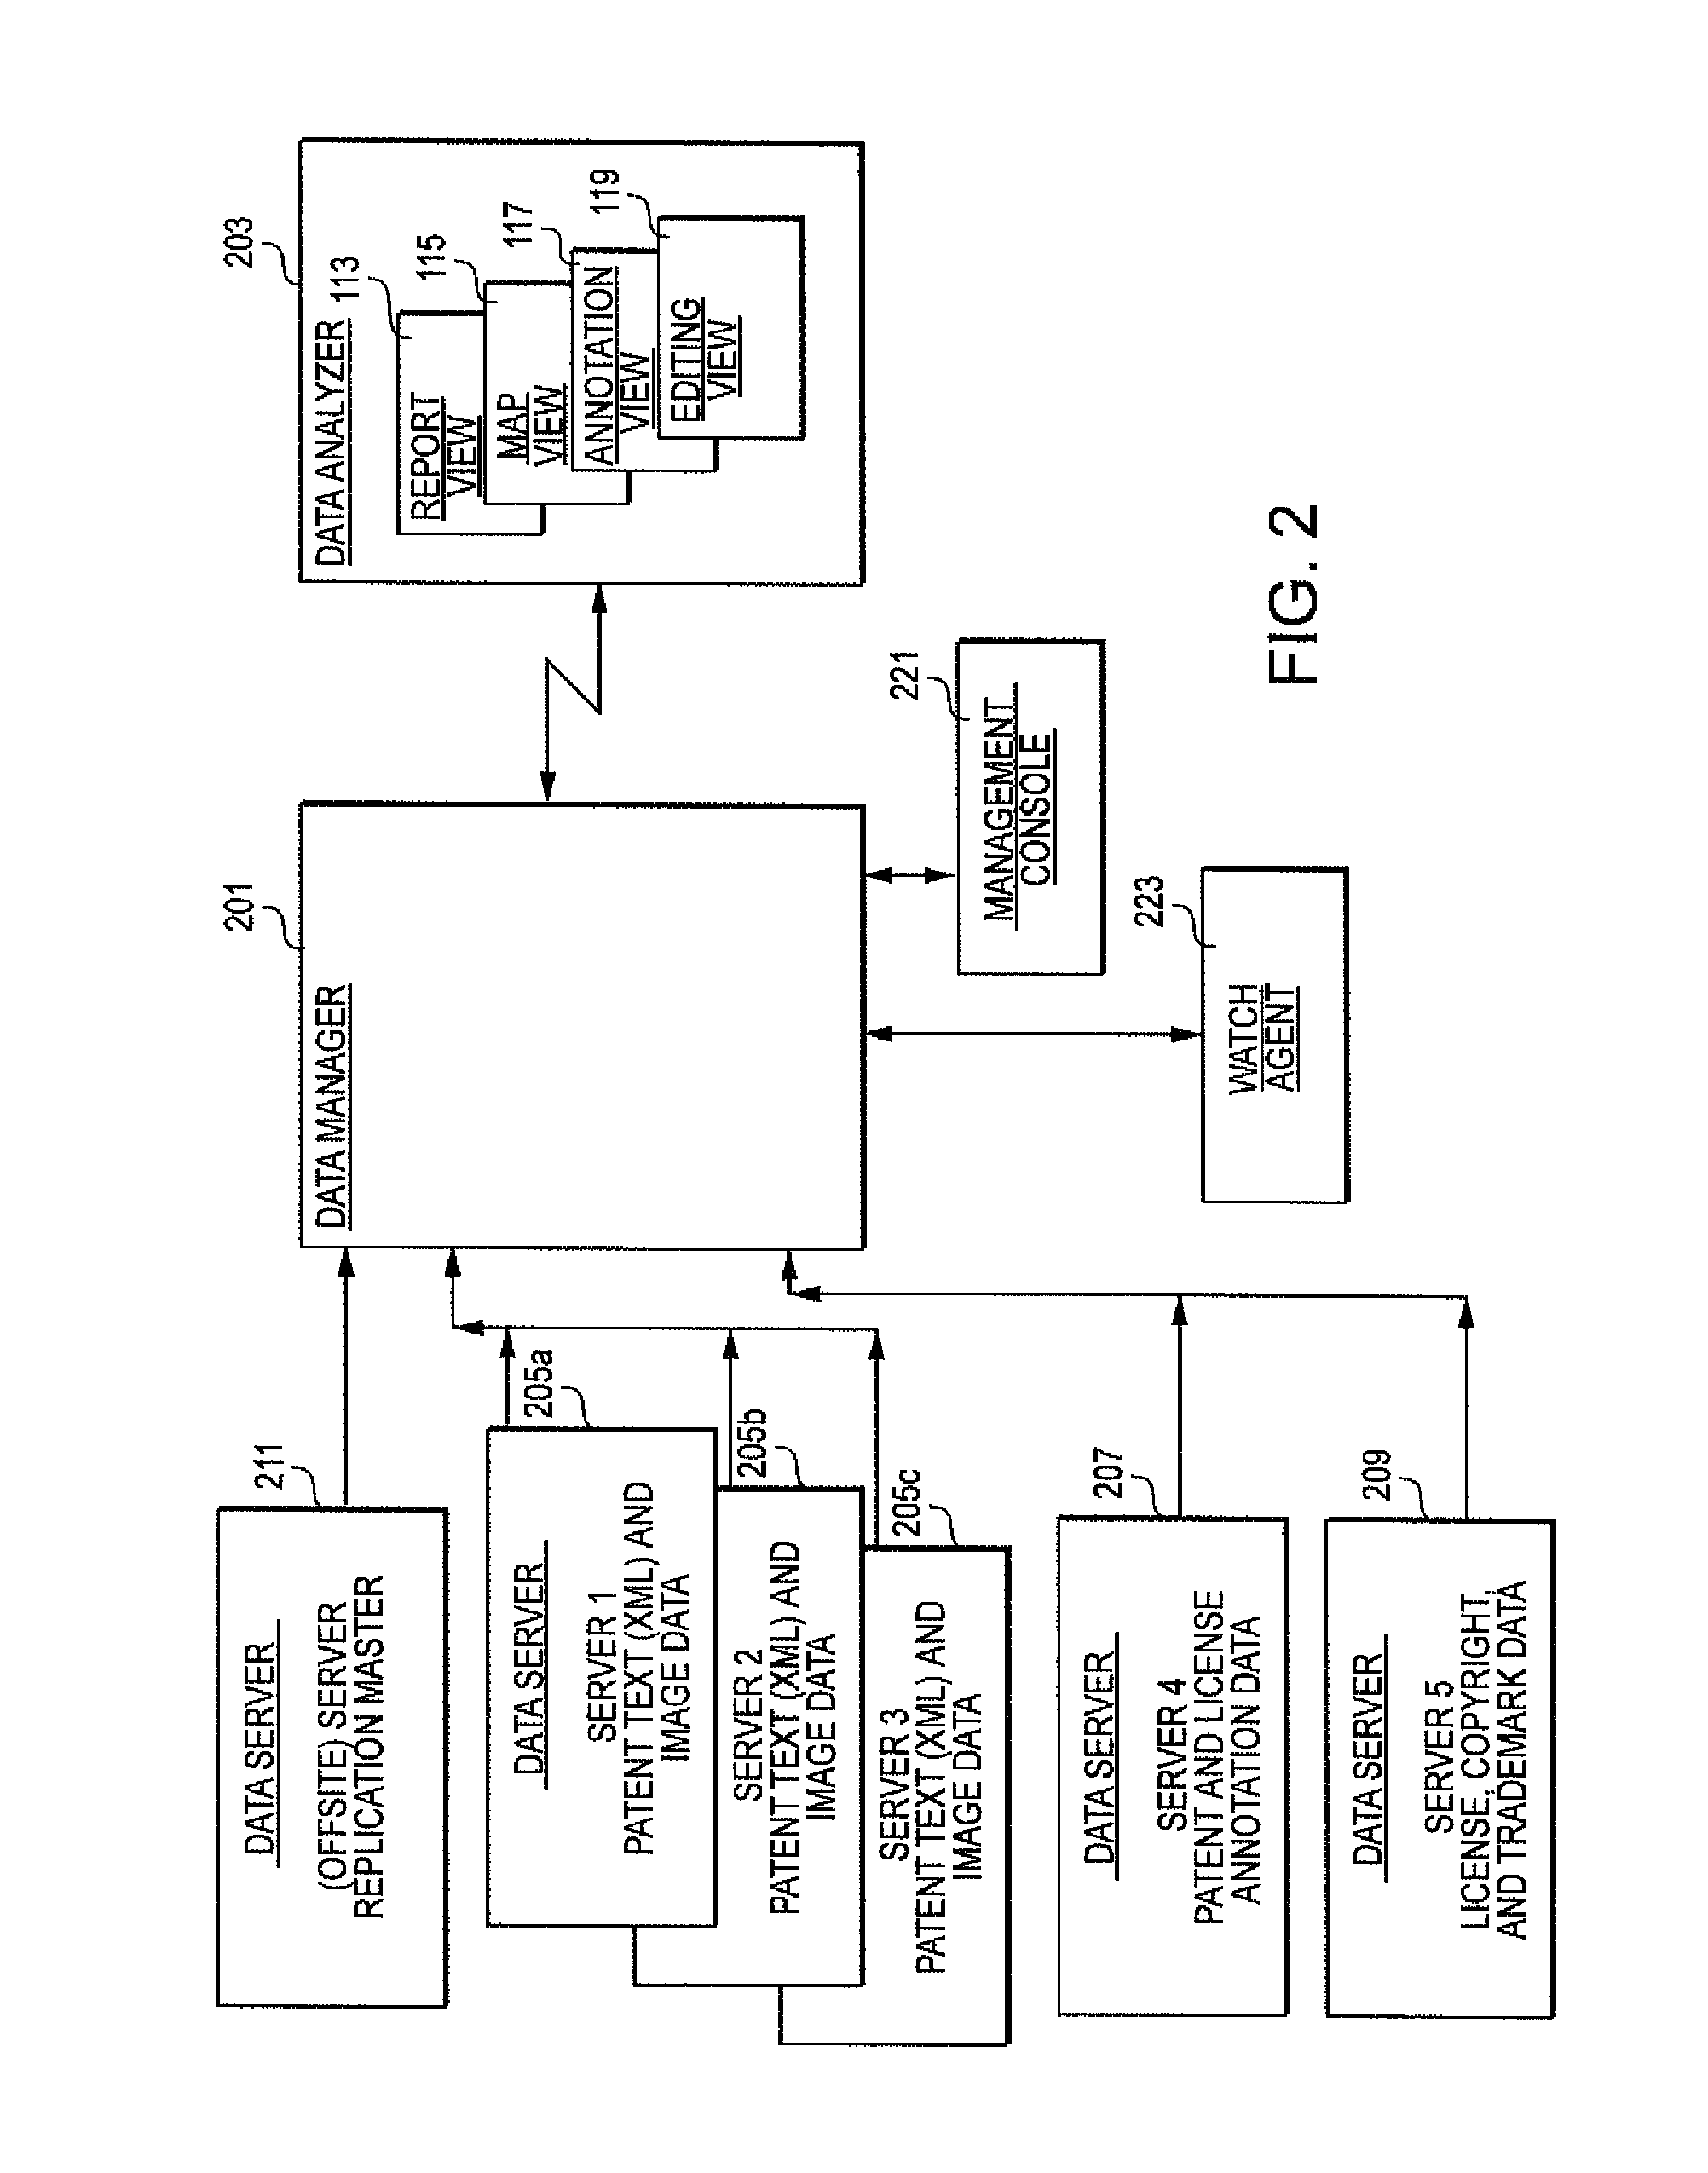 Computer-implemented method and system for managing attributes of intellectual property documents, optionally including organization thereof